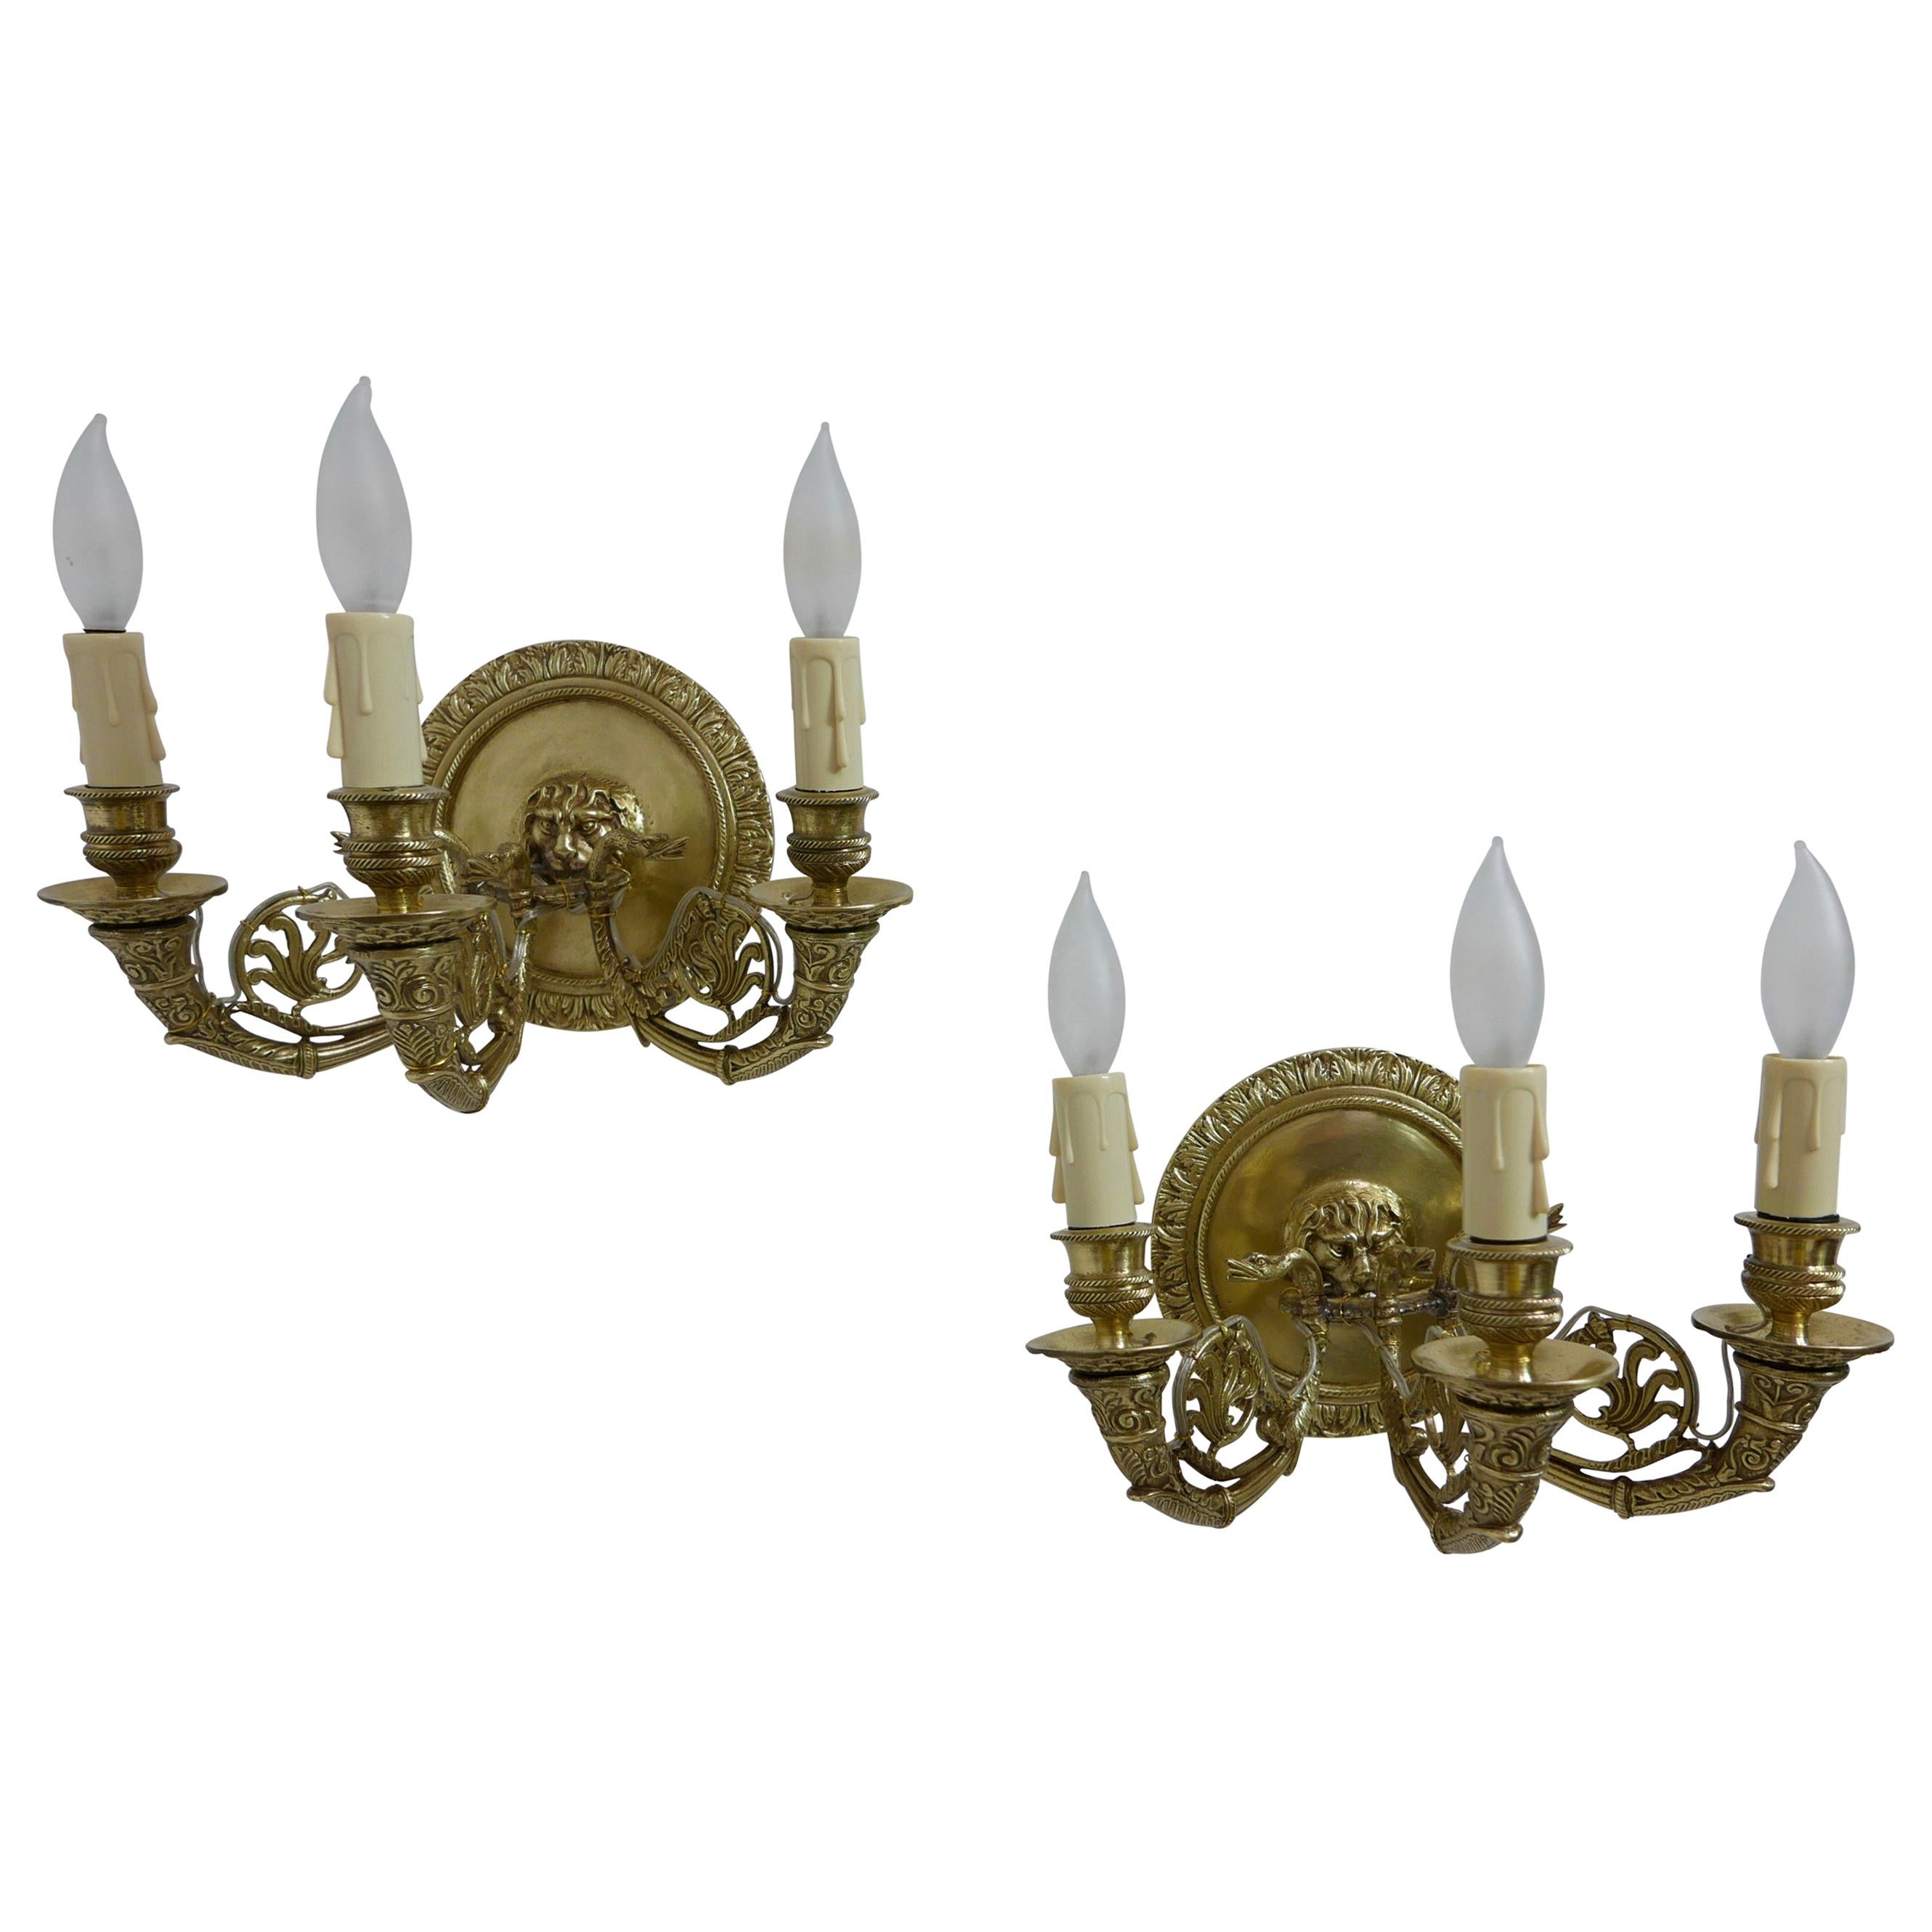 Pair of French Empire Brass Sconces, Early 19th Century